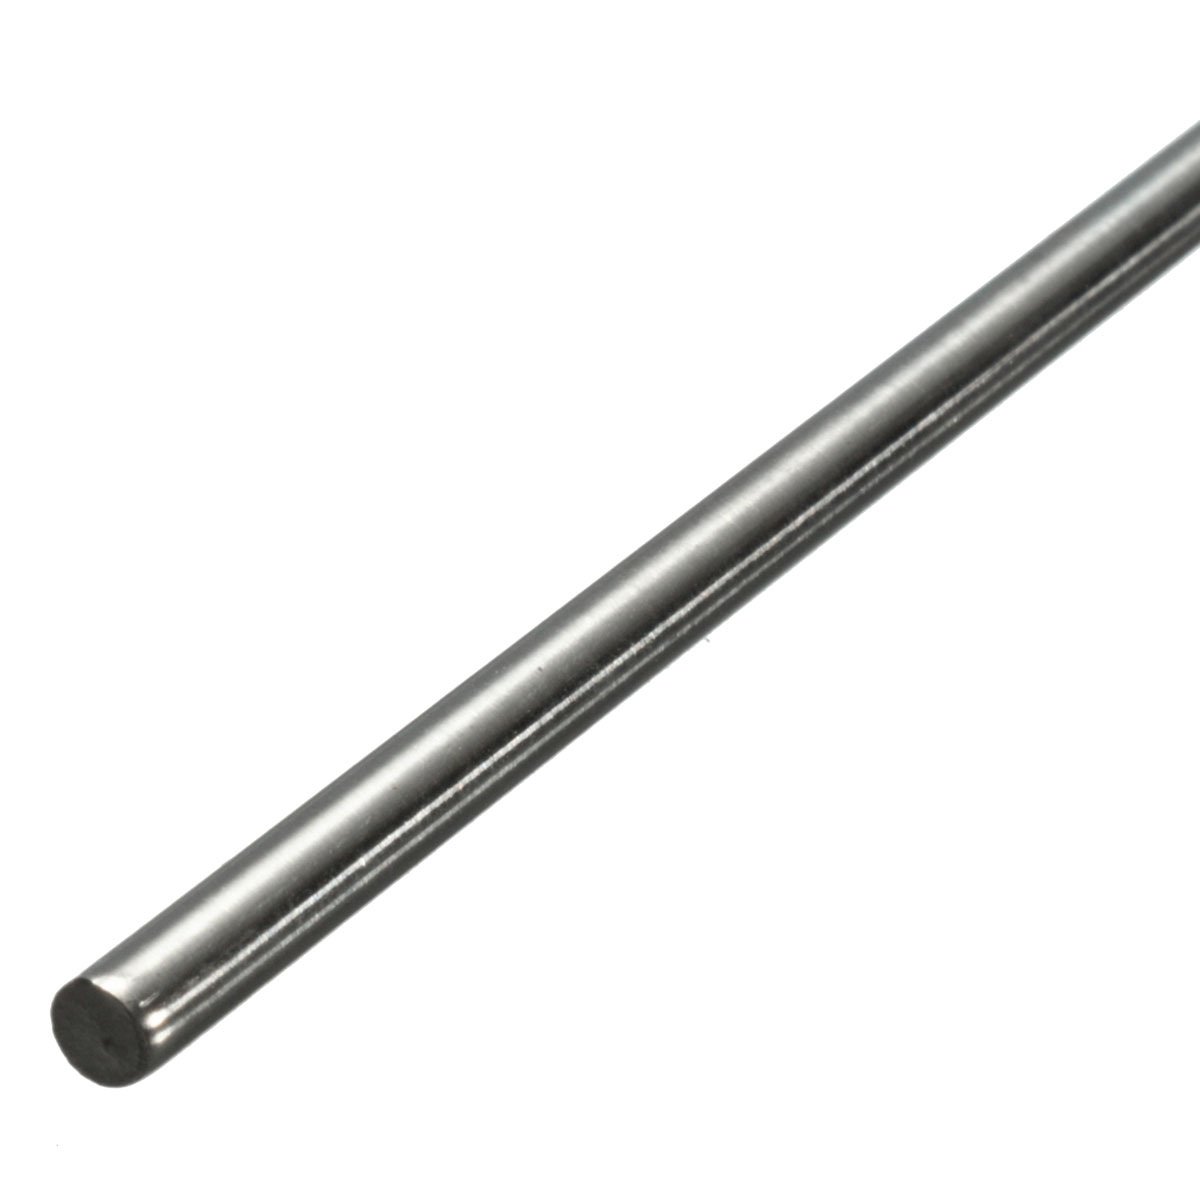 5pcs 500mm Diameter 3mm Stainless Steel Round Rod Round Solid Metal Bar Rod by FriccoBB Materials 